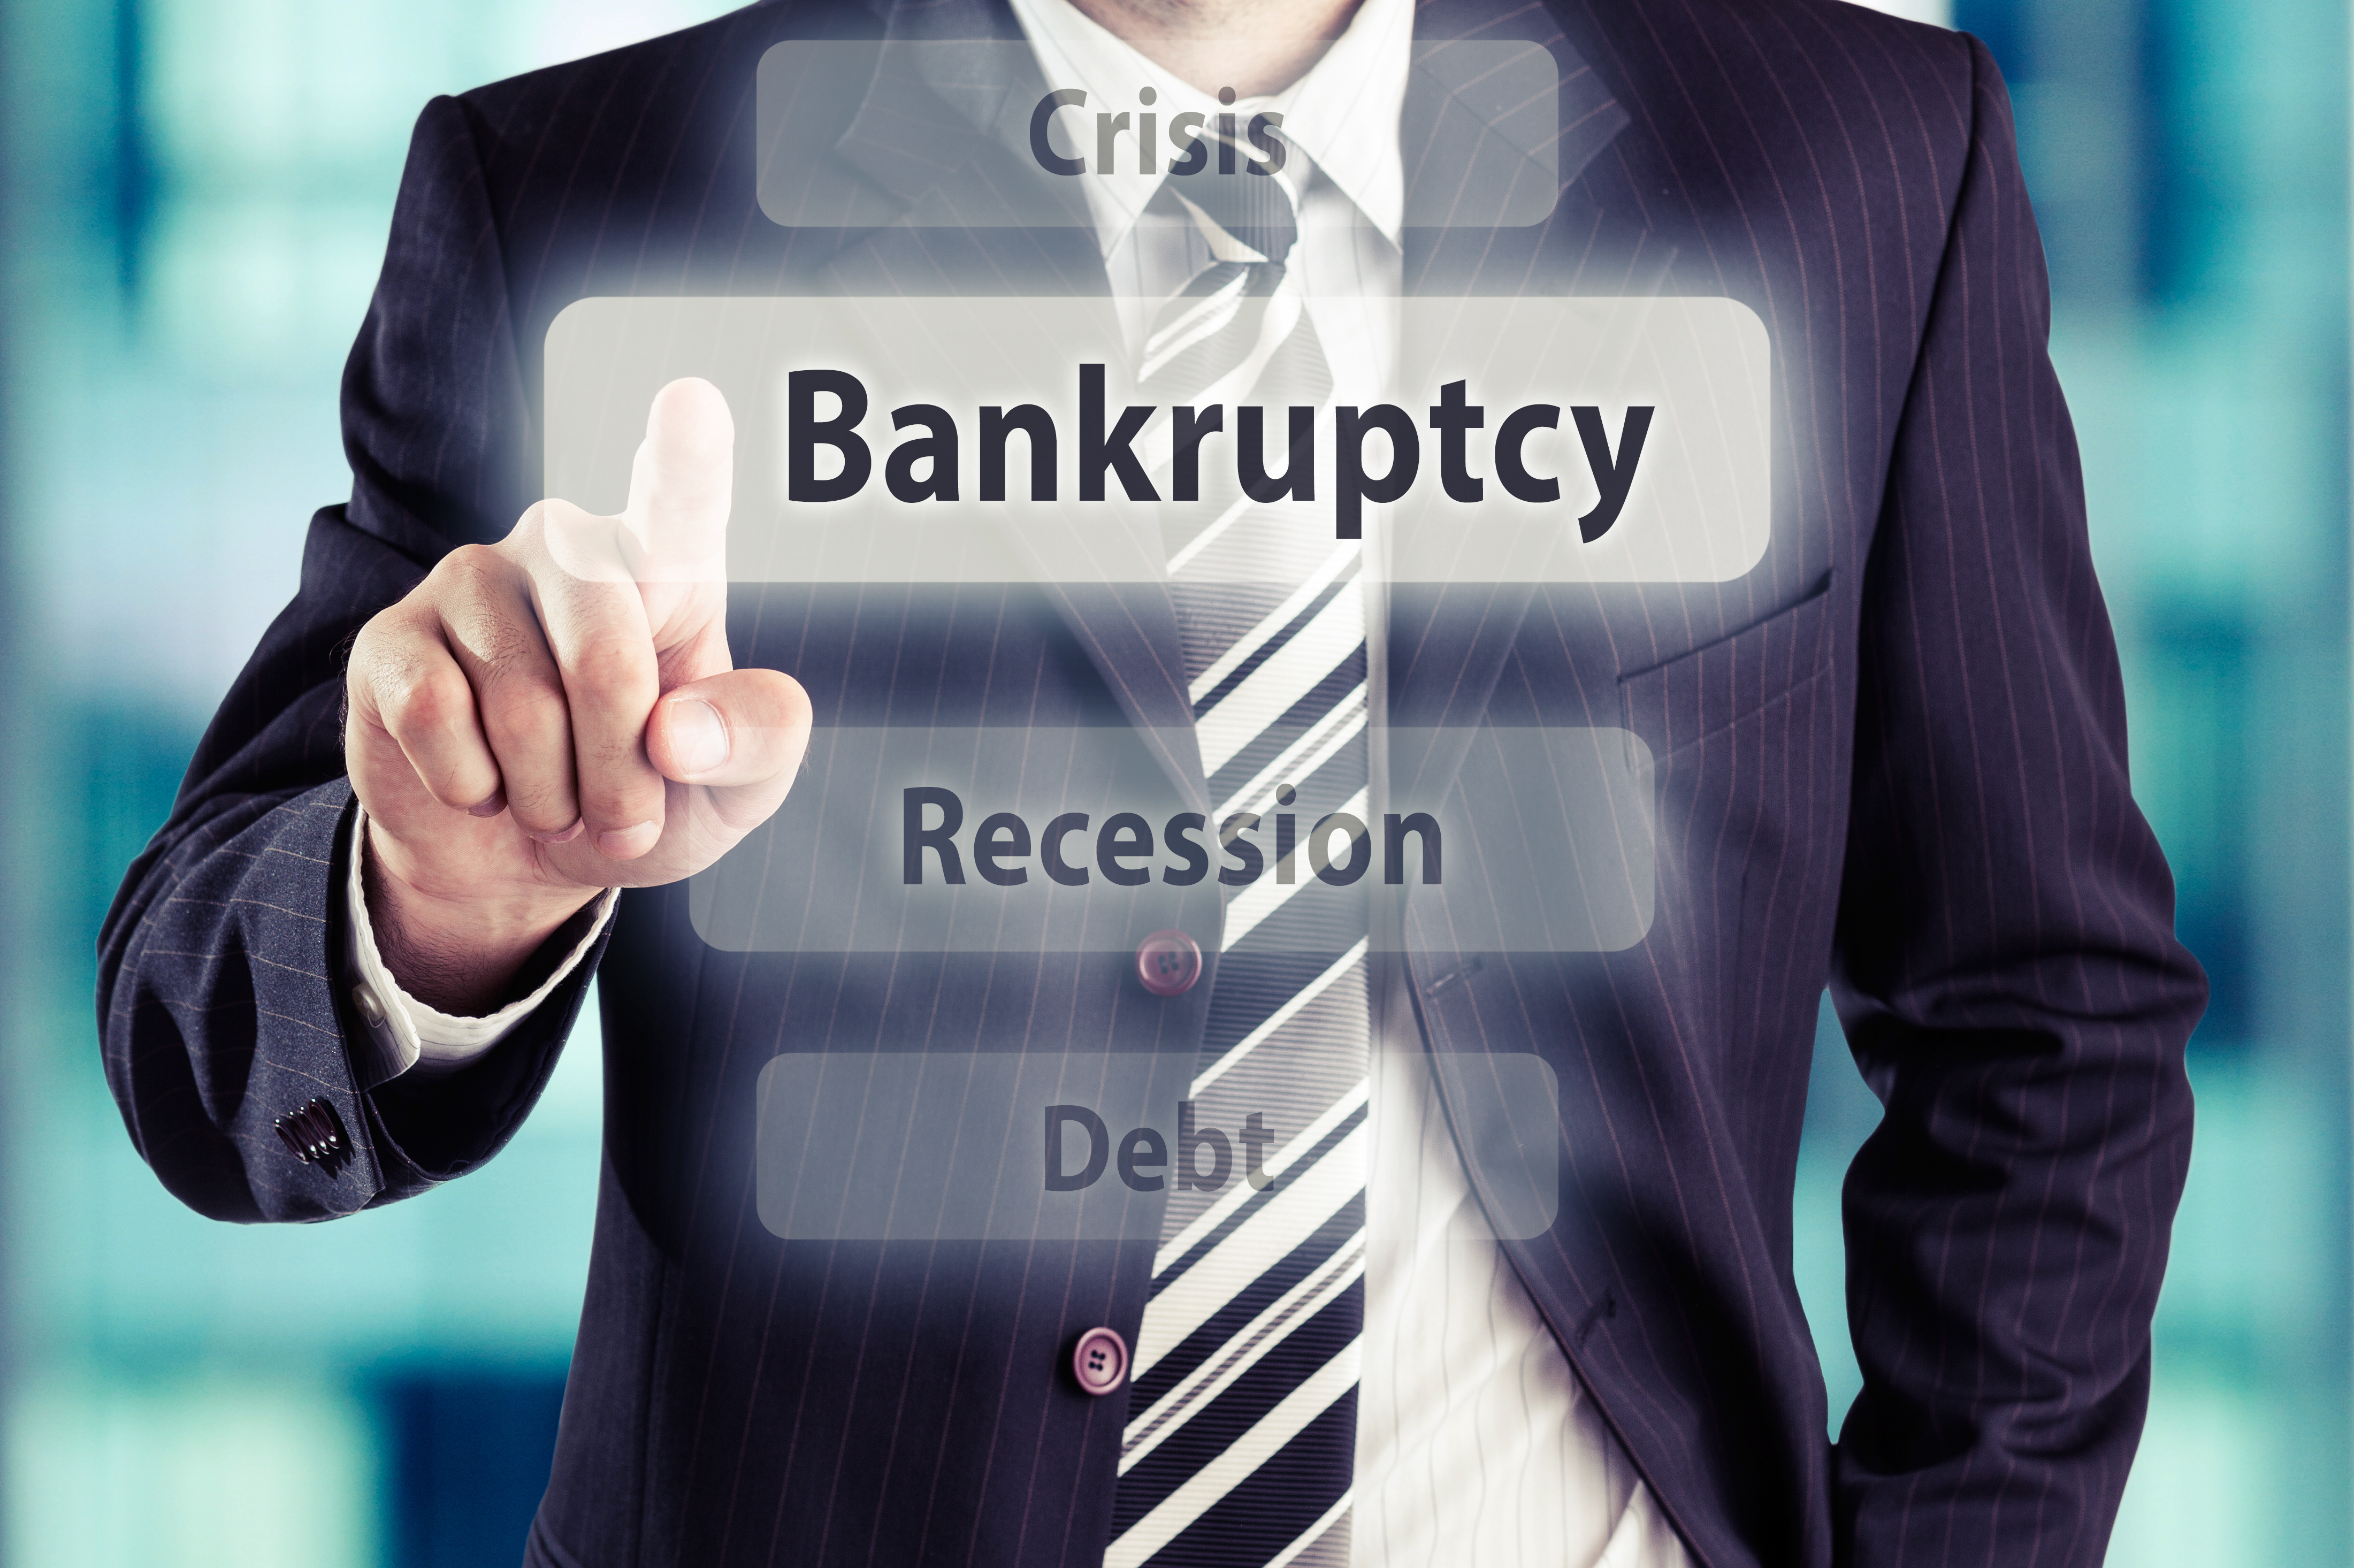 Start Chapter 13 Bankruptcy in Nevada with Price Law Group 866-210-1722